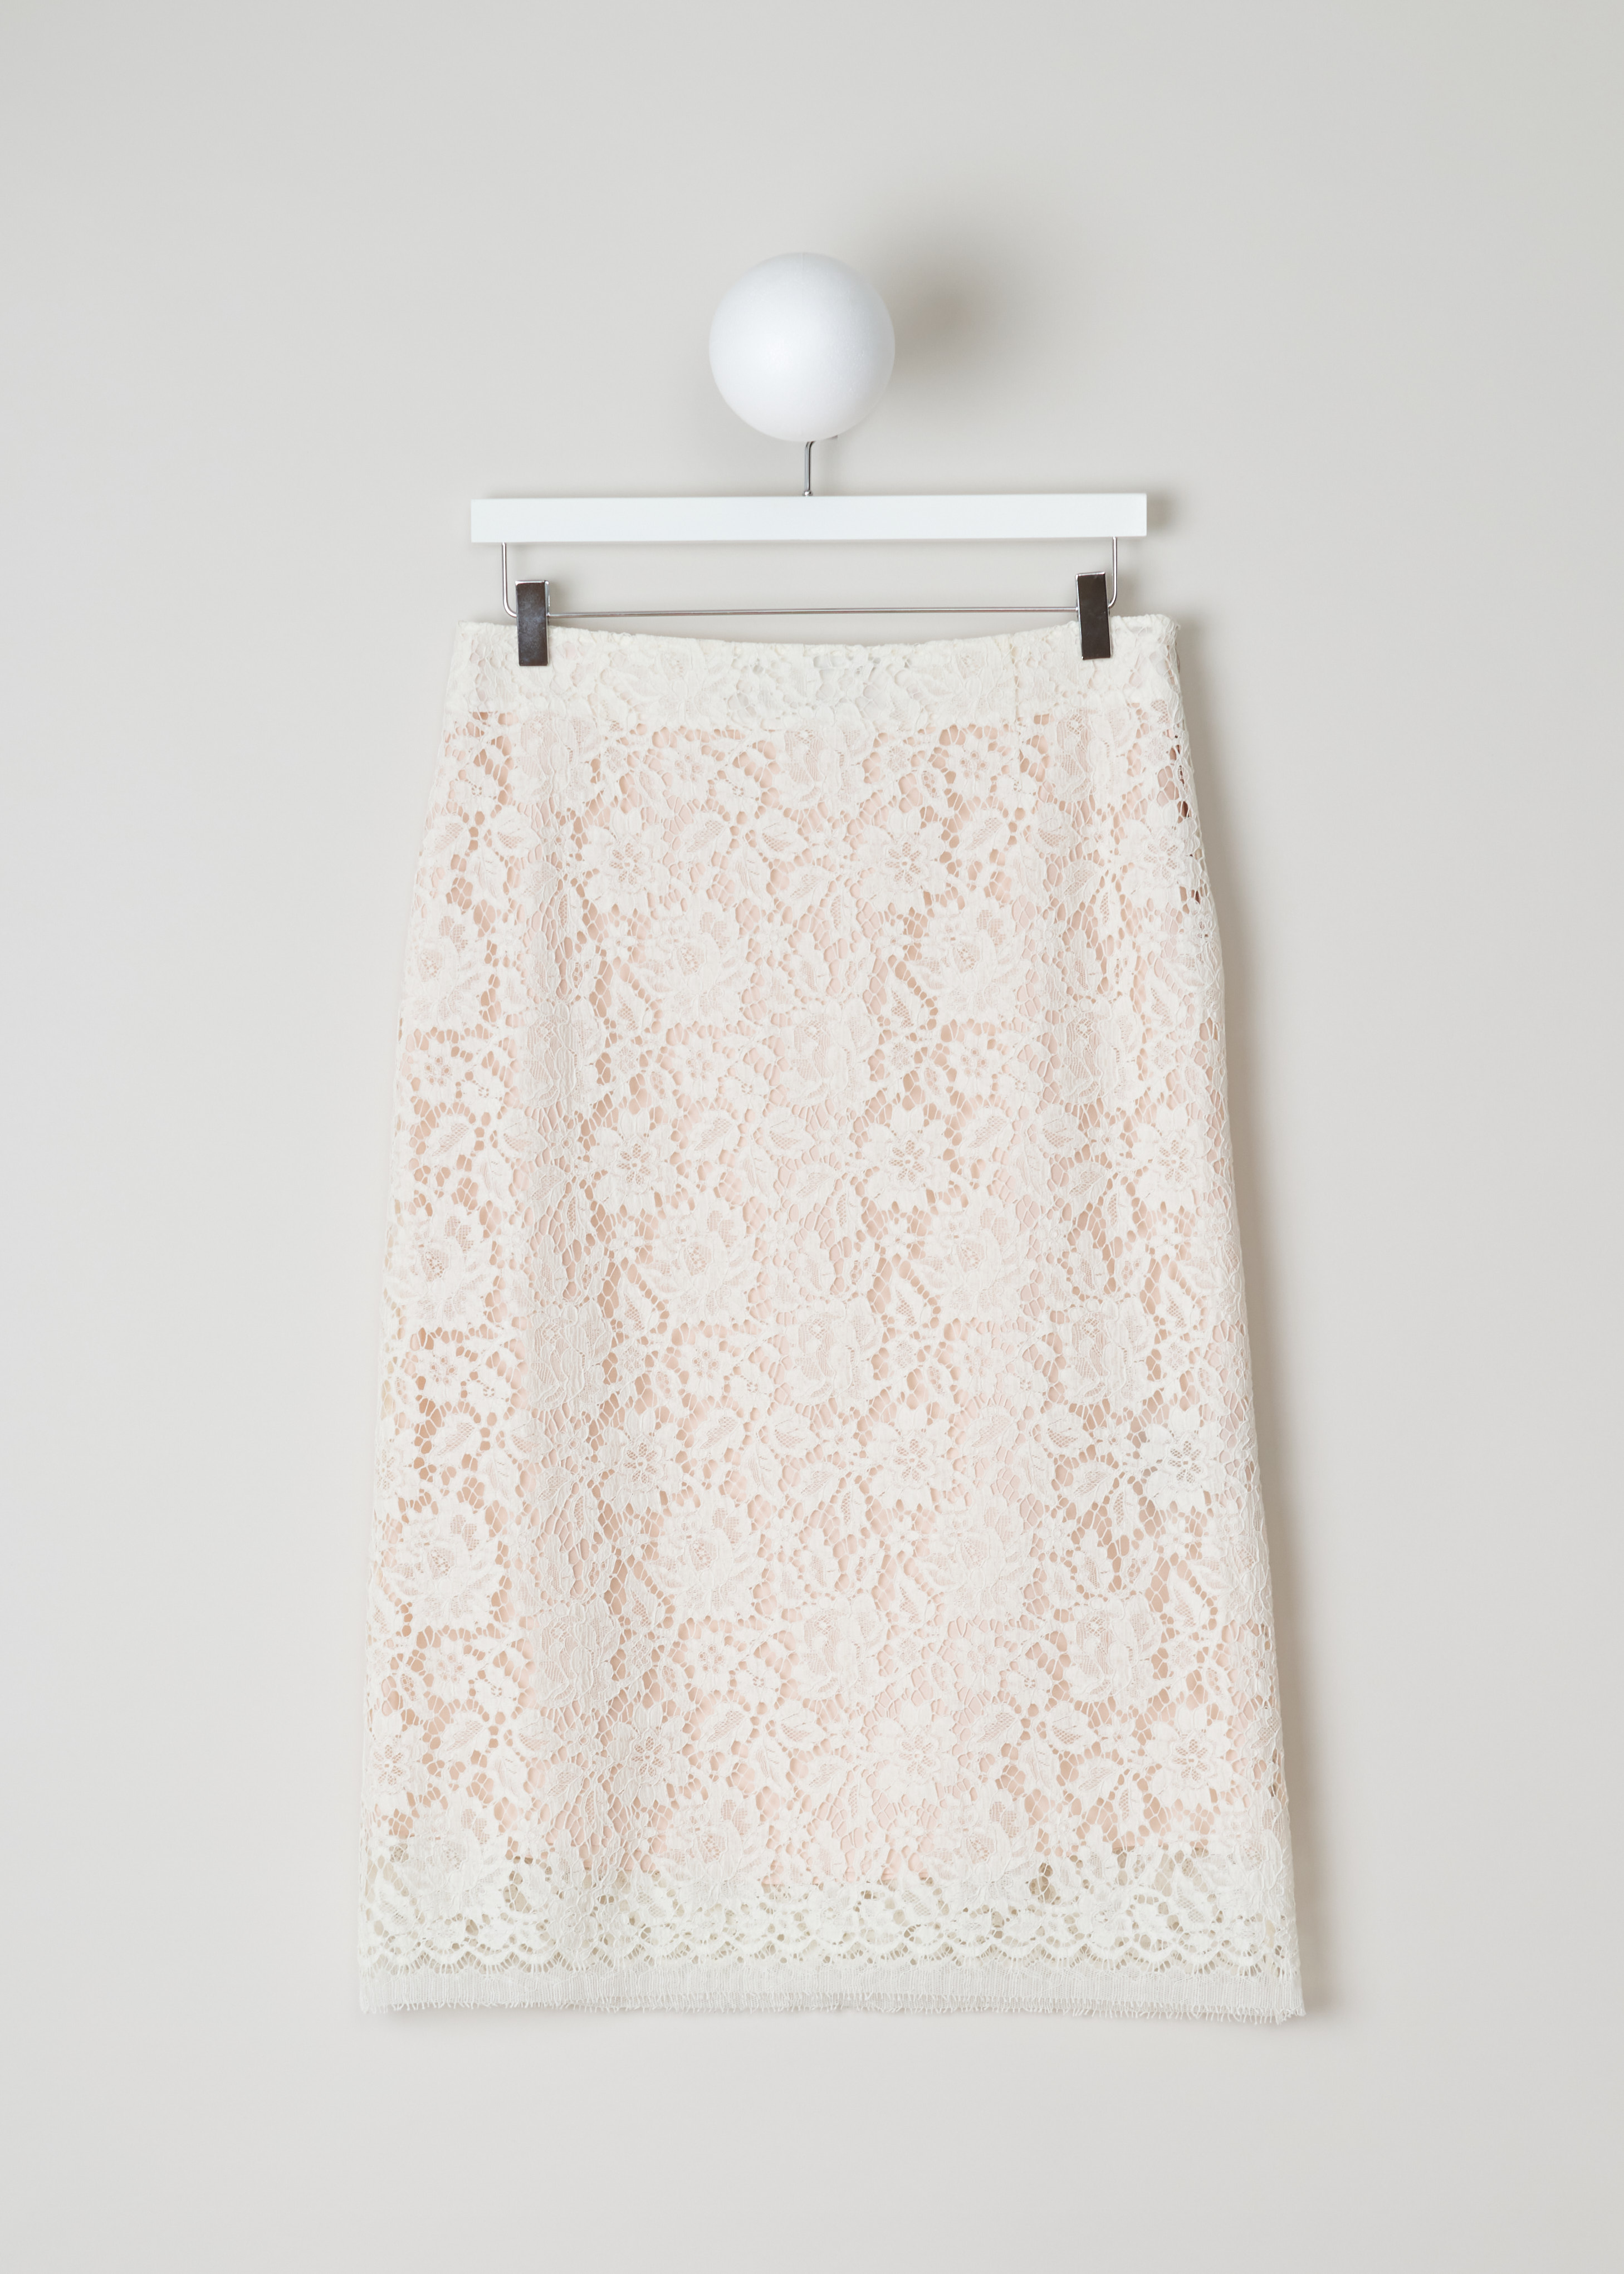 Calvin Klein 205W39NYC off-white lace skirt 81WWSA58_C186_102 ecru front. Knee length off white lace skirt. With a nude coloured silk lining for extra depth. This straight model is high waisted and has a concealed zipper on the side.